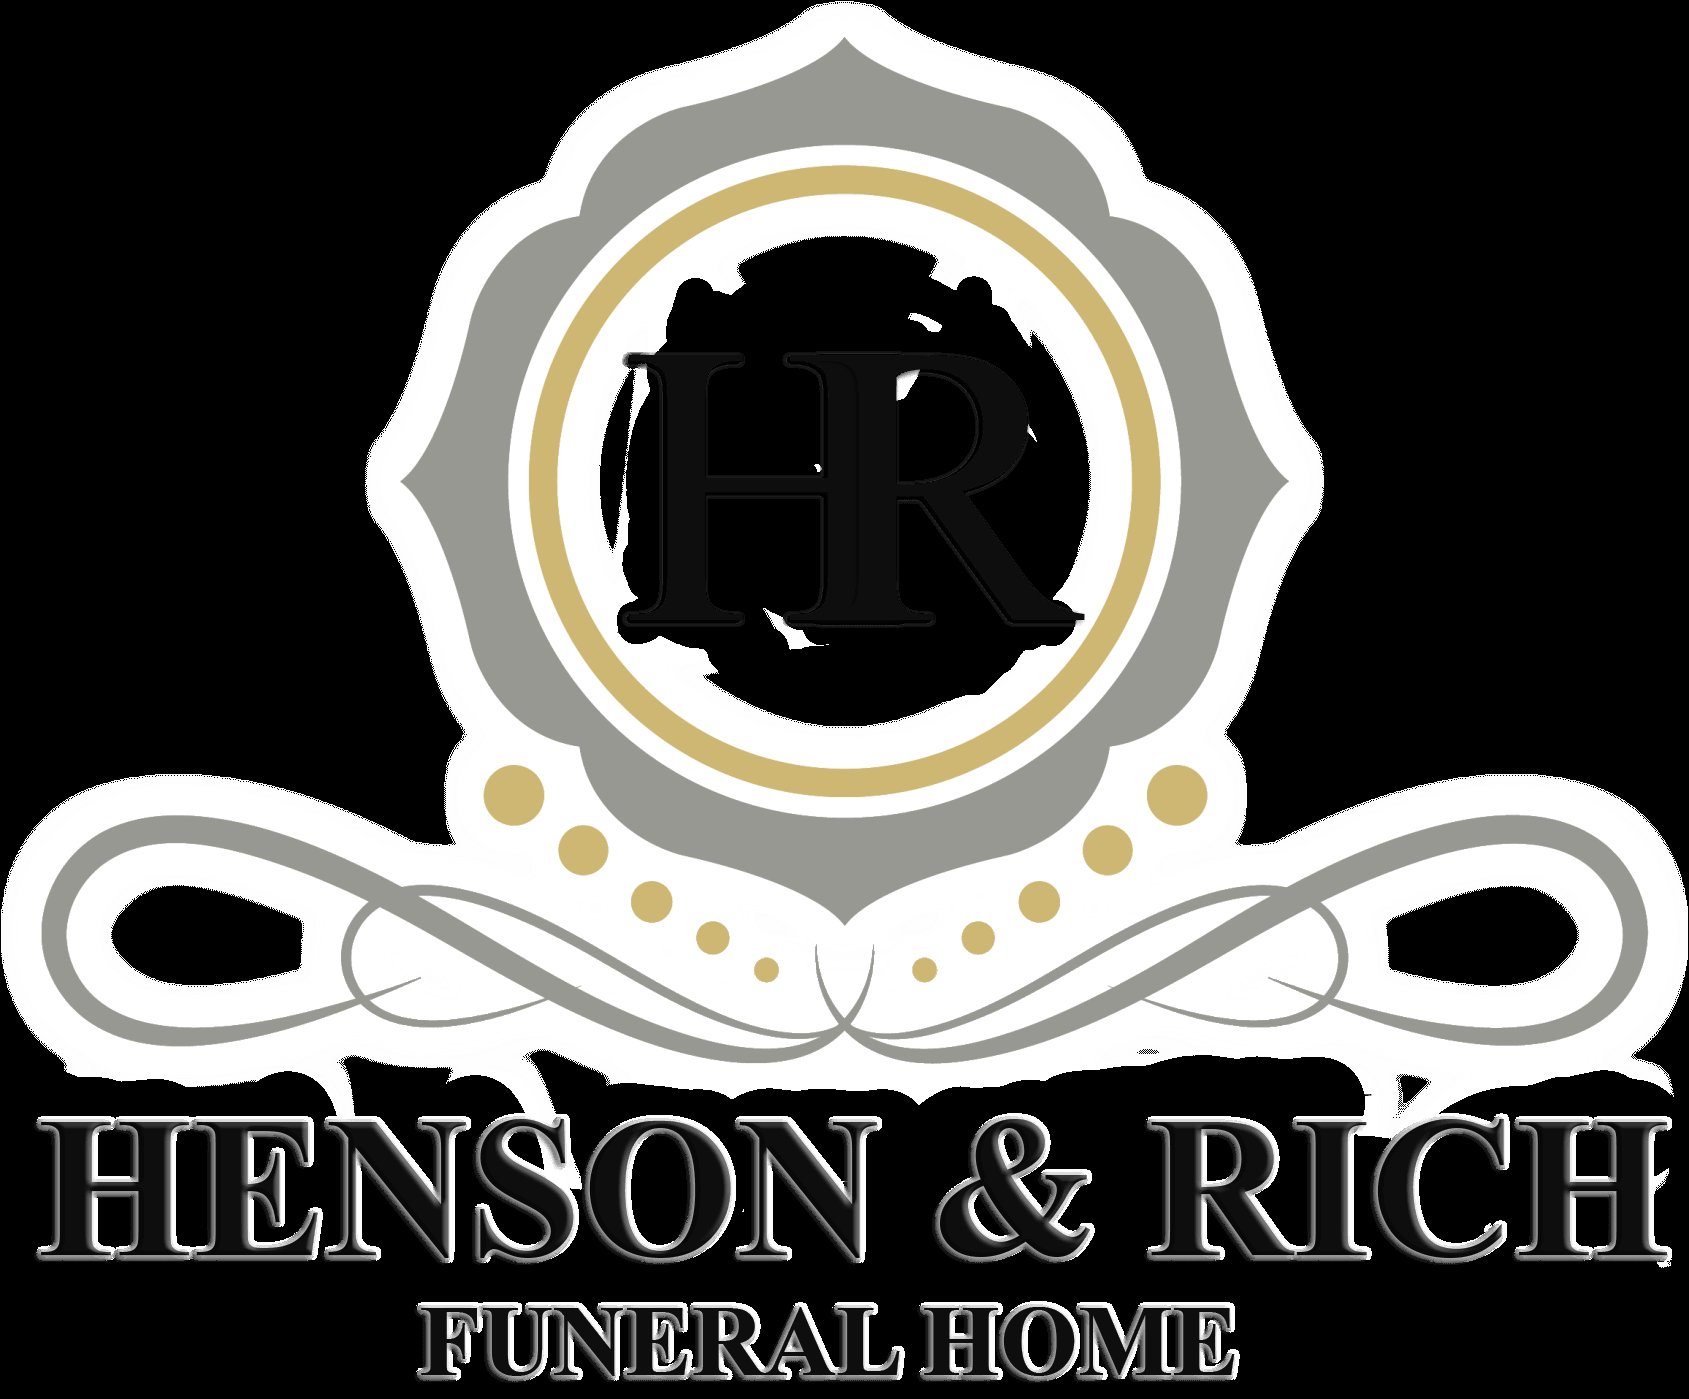 Gentle Farewell Services With Henson & Rich Funeral Home